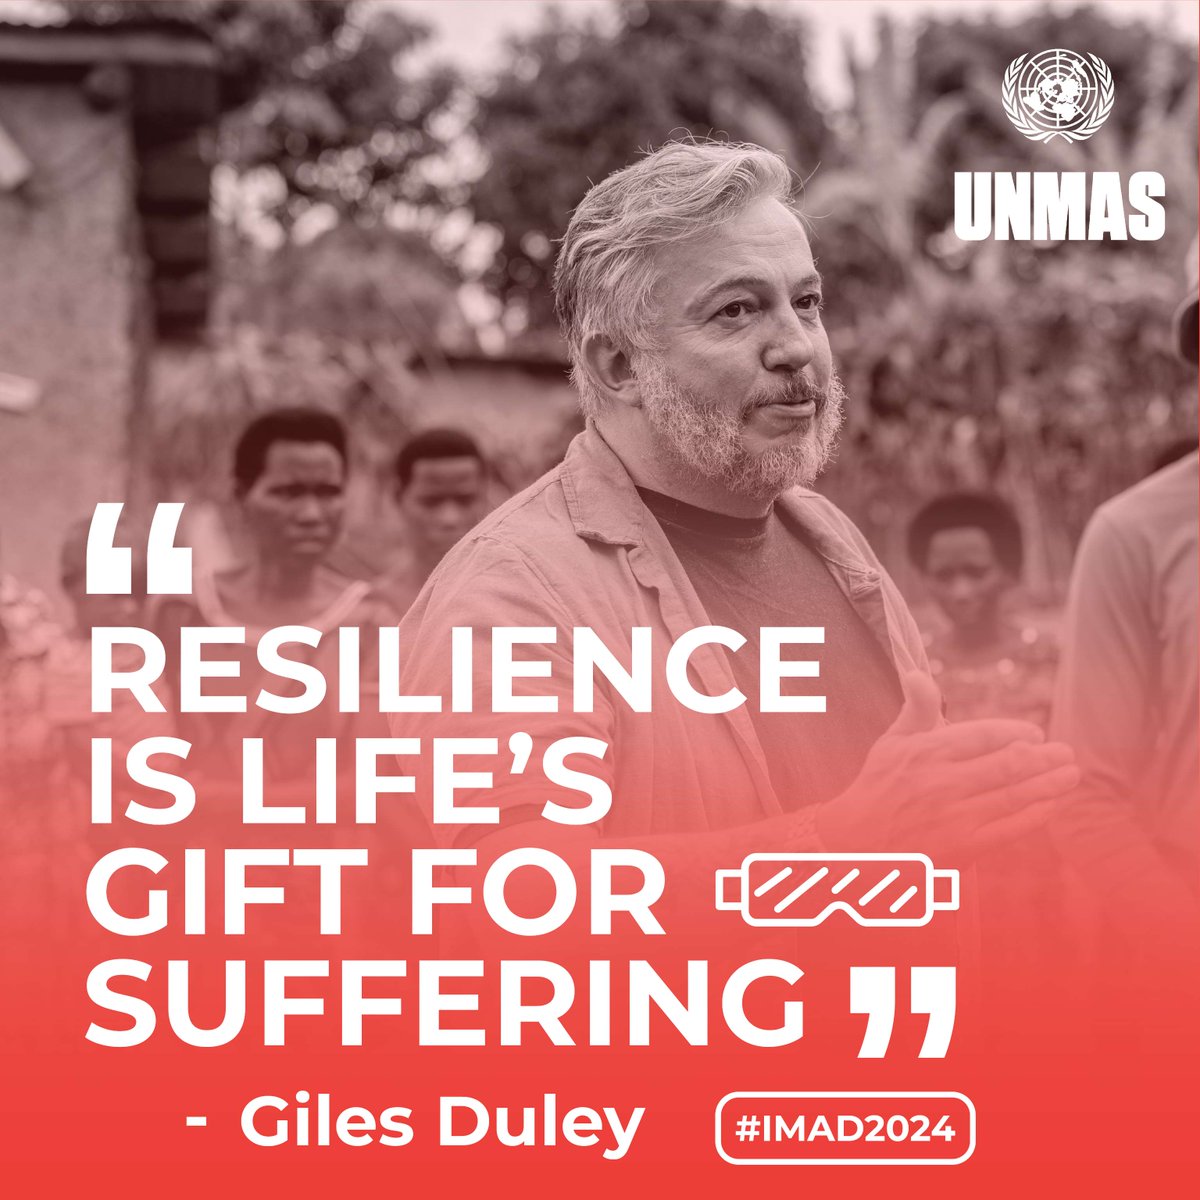 'I get to share these stories with people going through really terrible experiences.' The inspiring interview of Giles Duley, @UN Global Advocate for persons with disabilities in conflict, who severely injured by an improvised explosive device. @UNMAS 👉un.org/en/awake-at-ni…